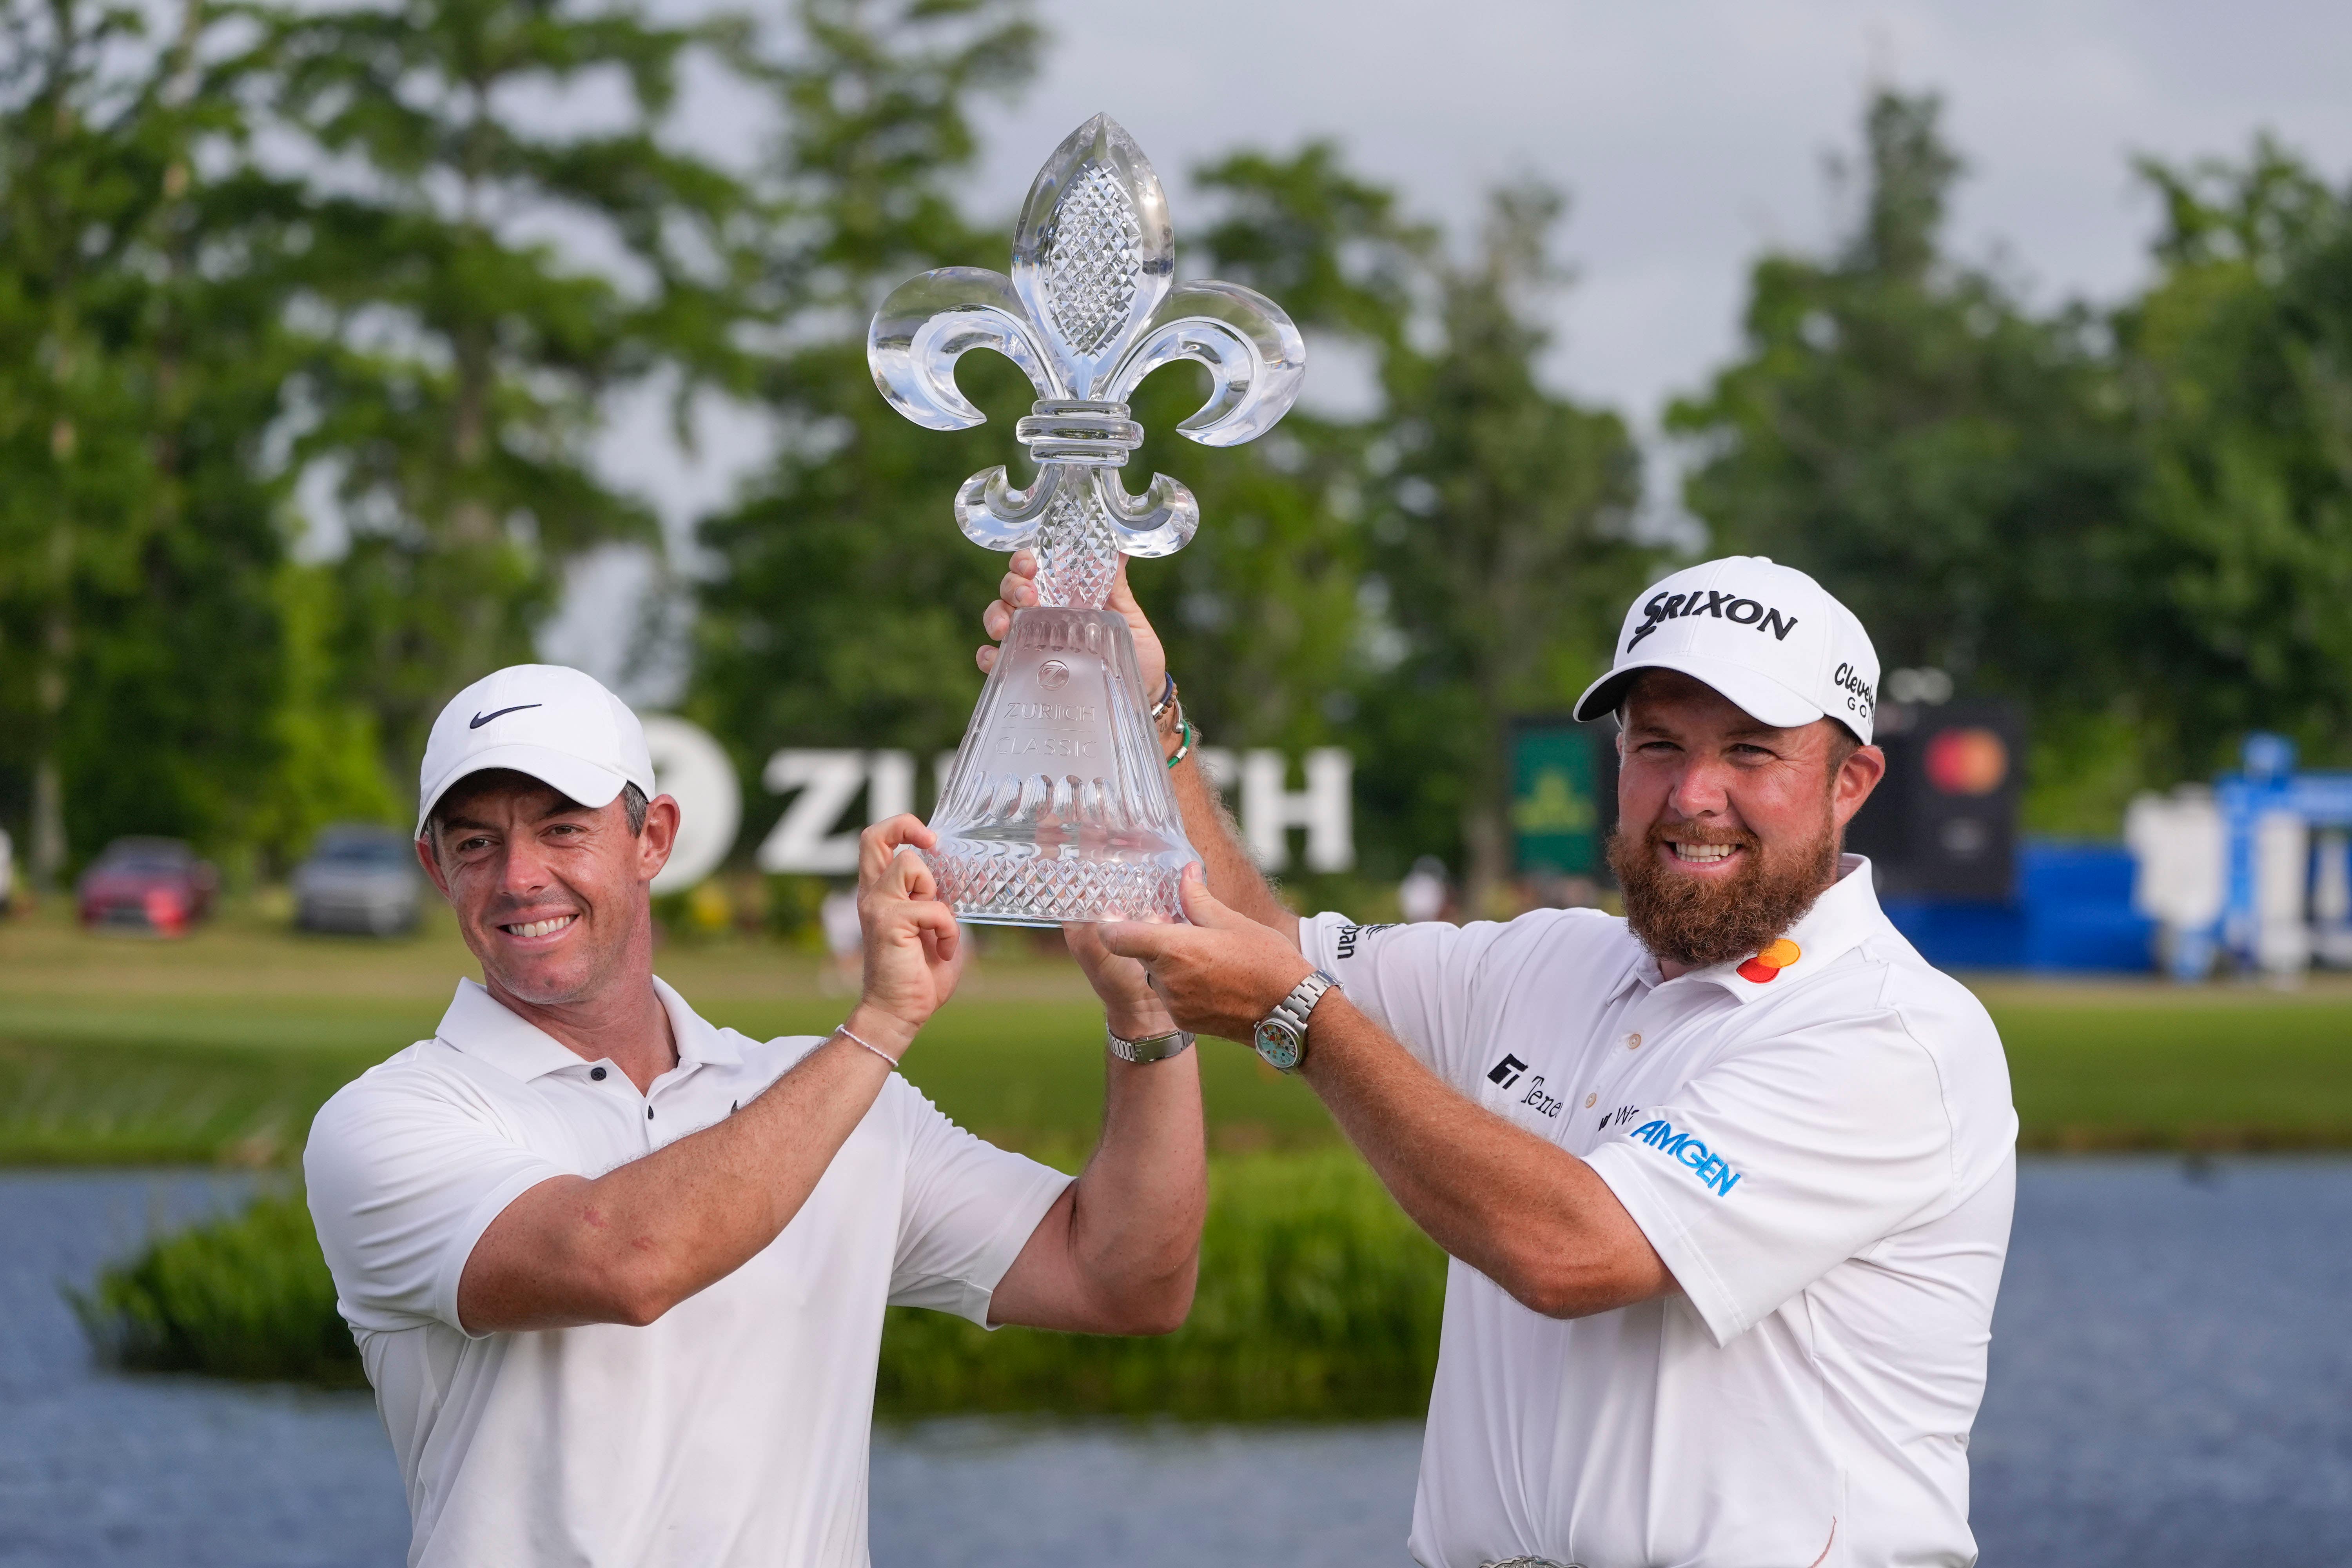 Rory McIlroy and Shane Lowry win Zurich Classic of New Orleans after play-off | The Independent